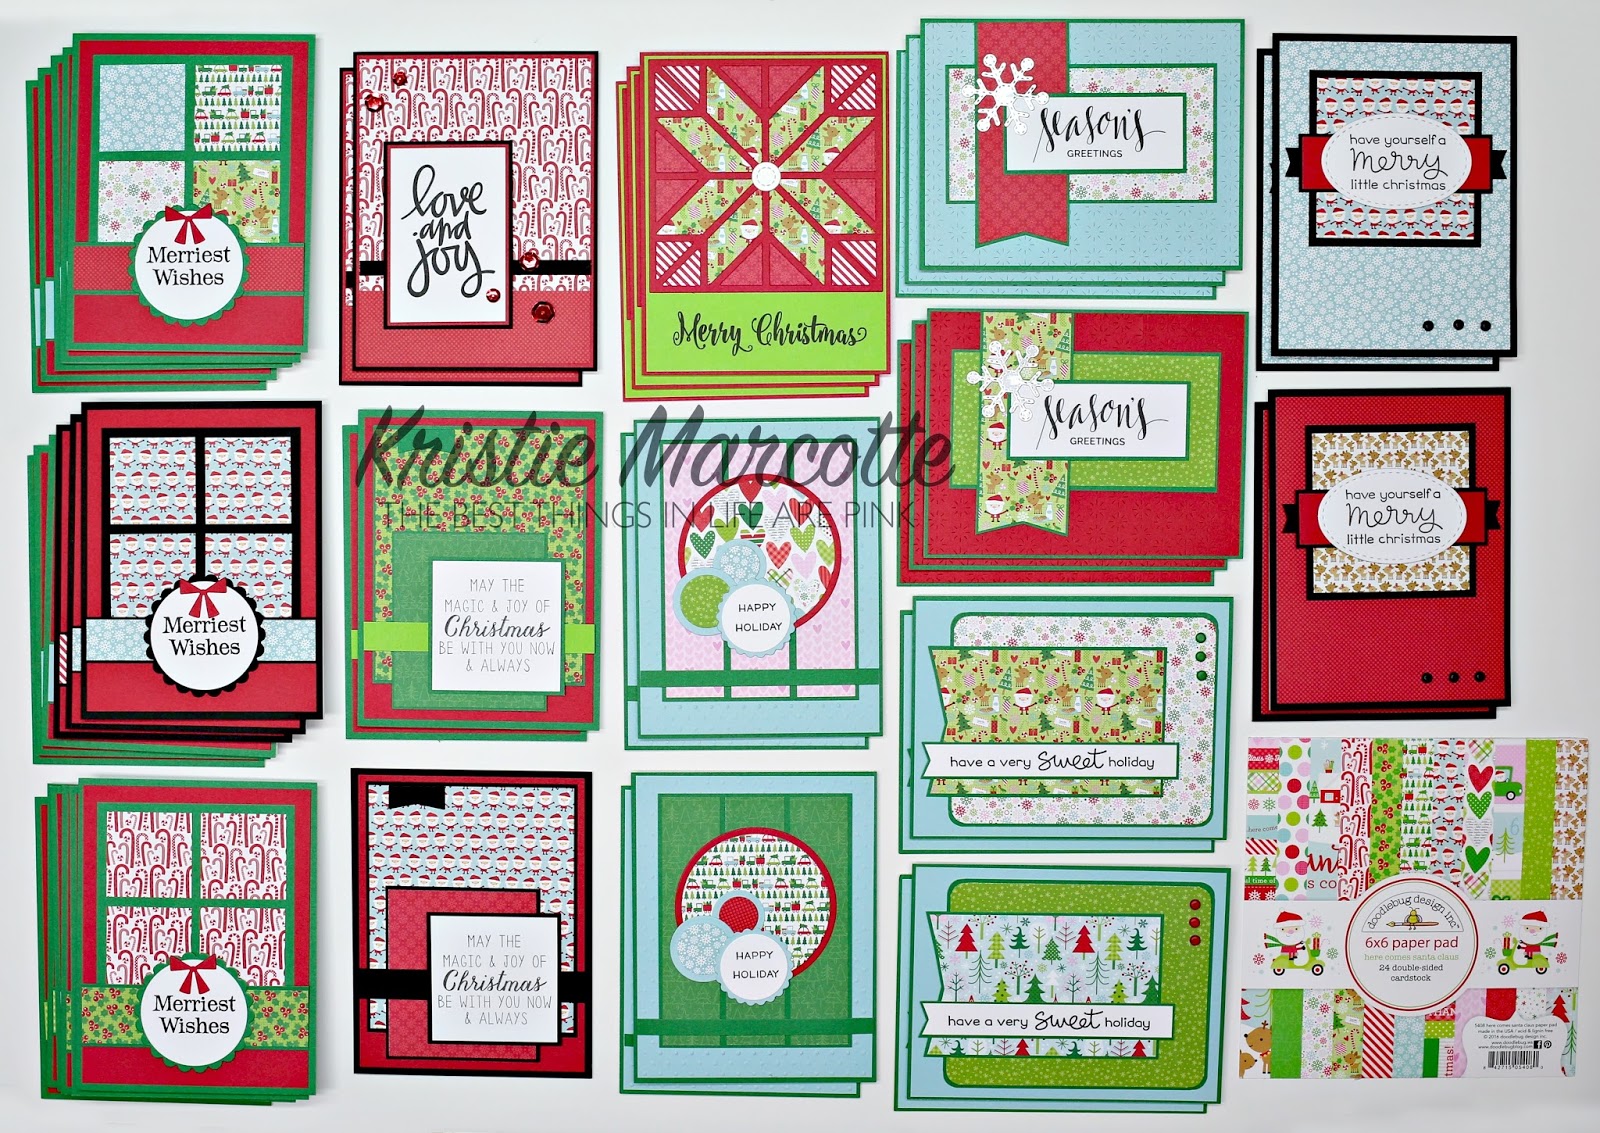 Doodlebug’s Here Comes Santa Claus – cards from 6×6 paper pad